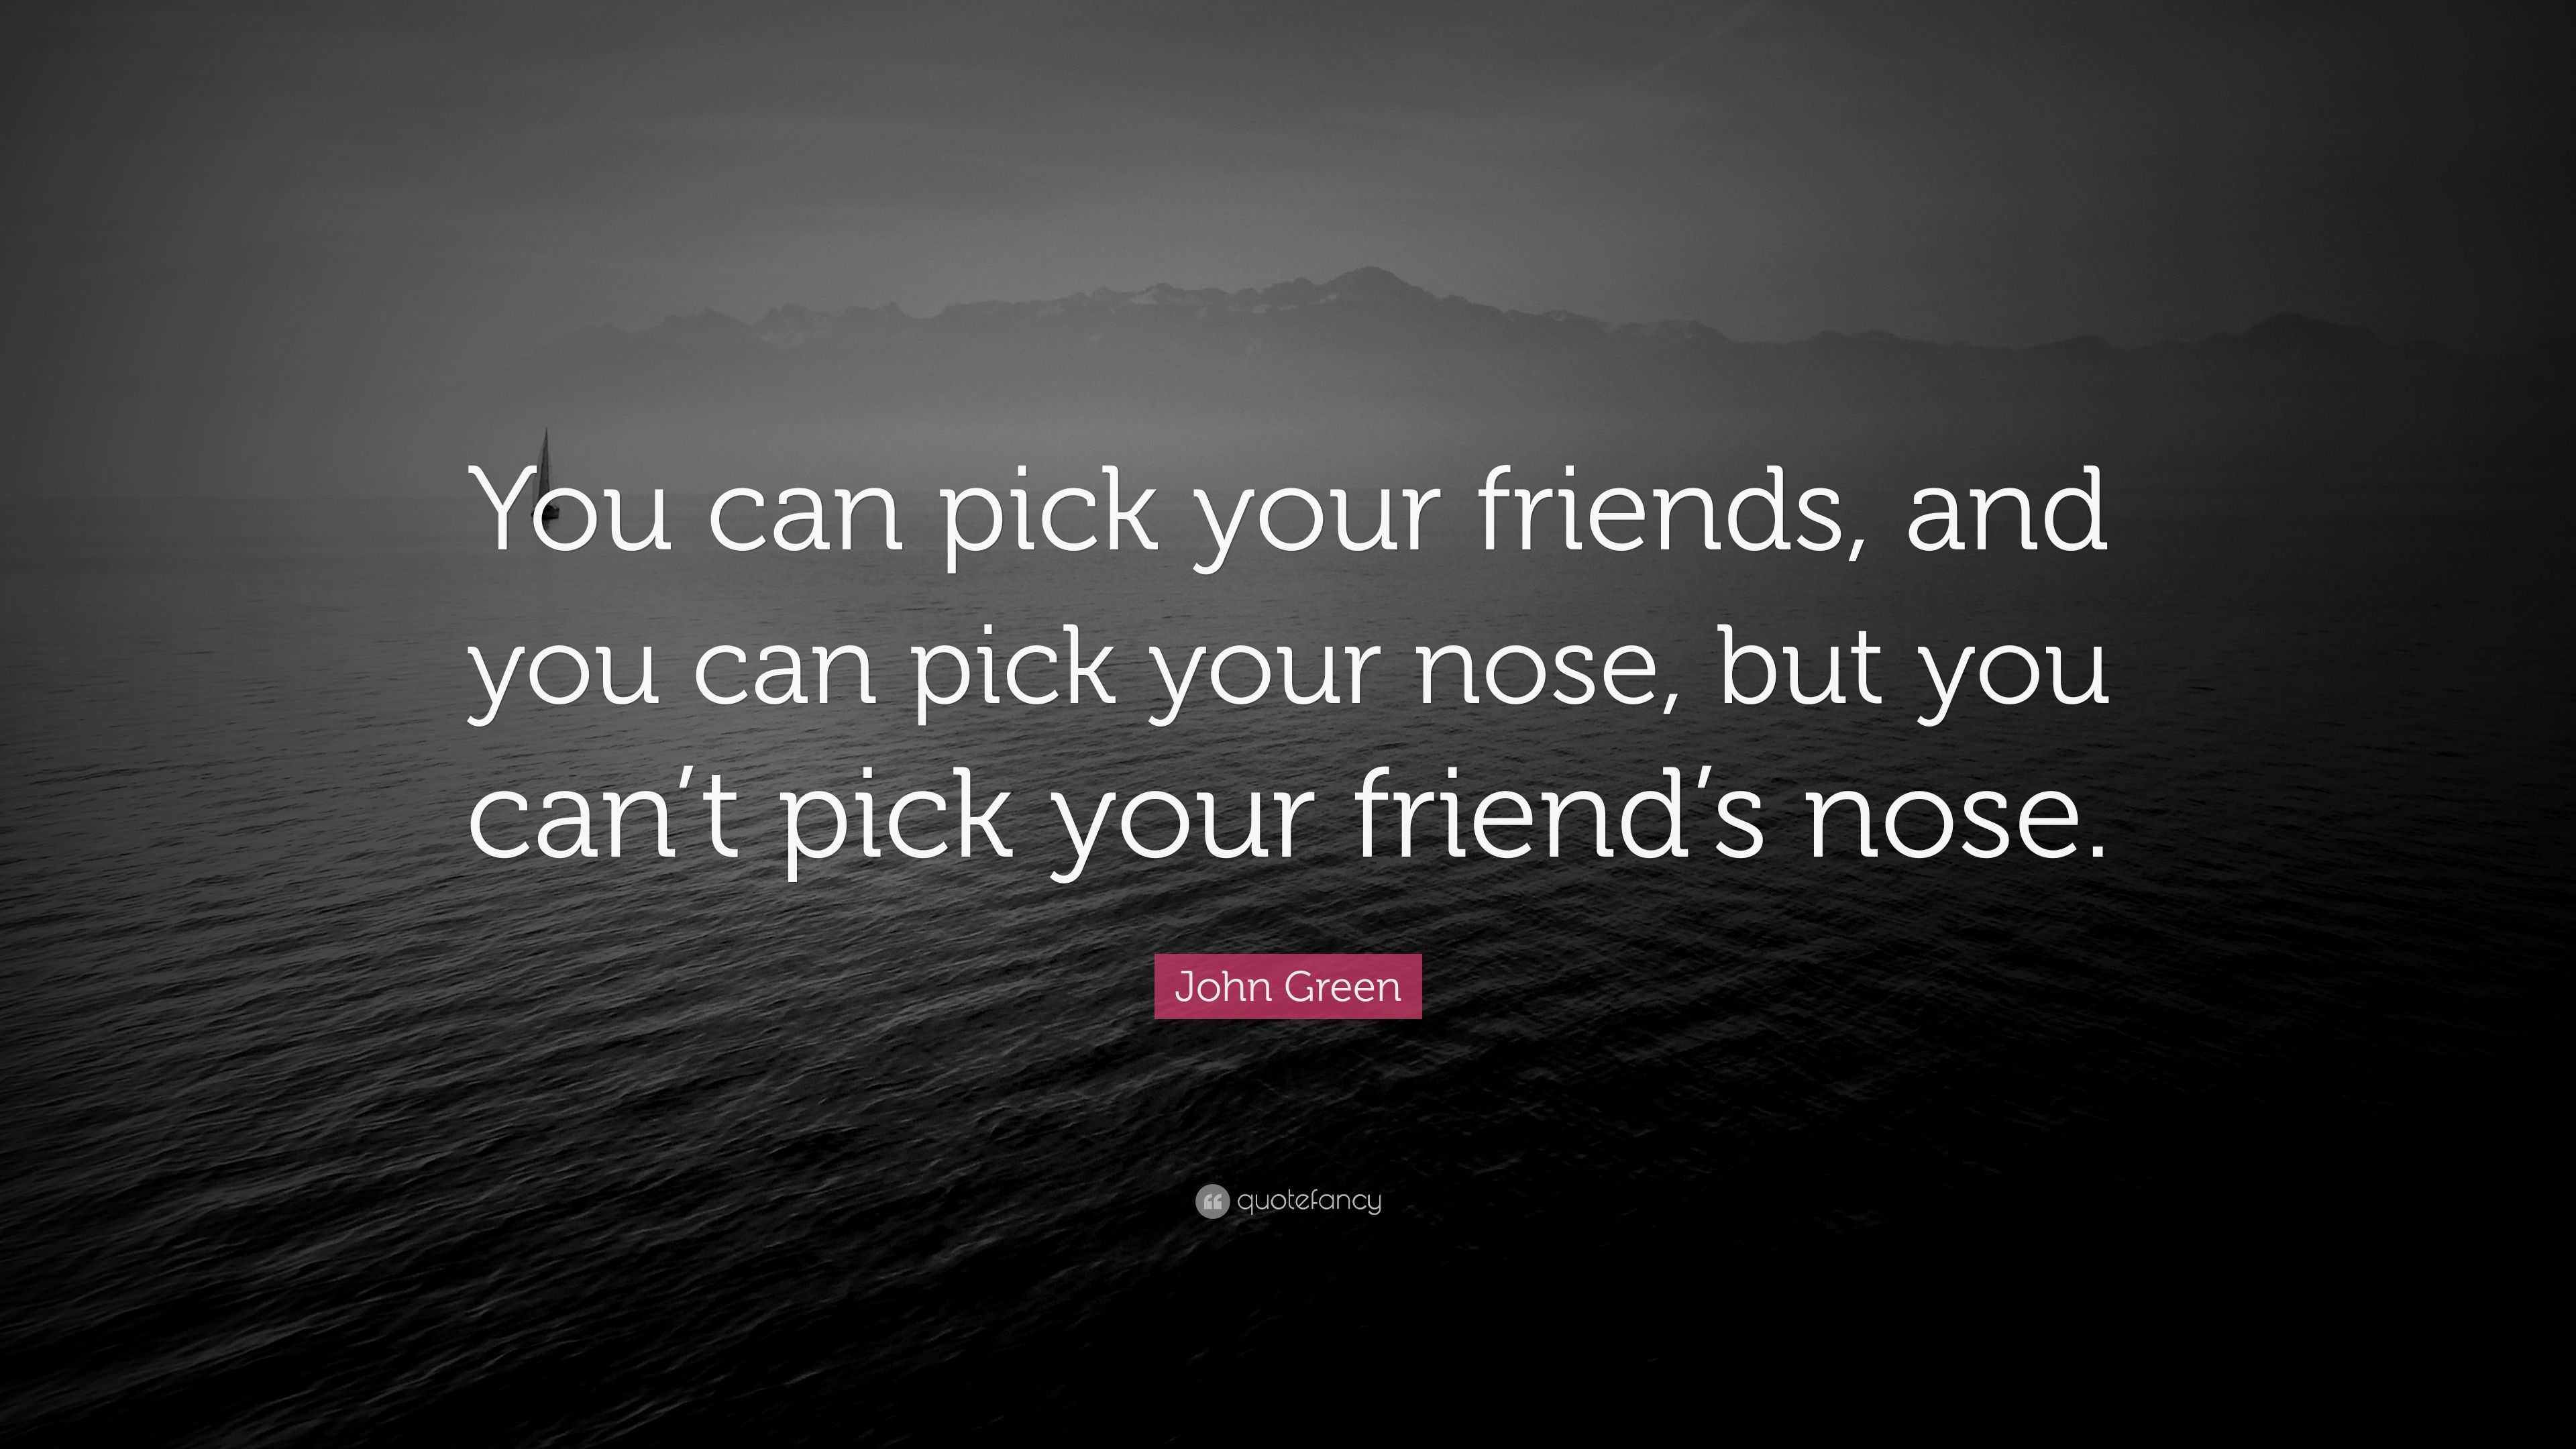 John Green Quote: “You can pick your friends, and you can pick your